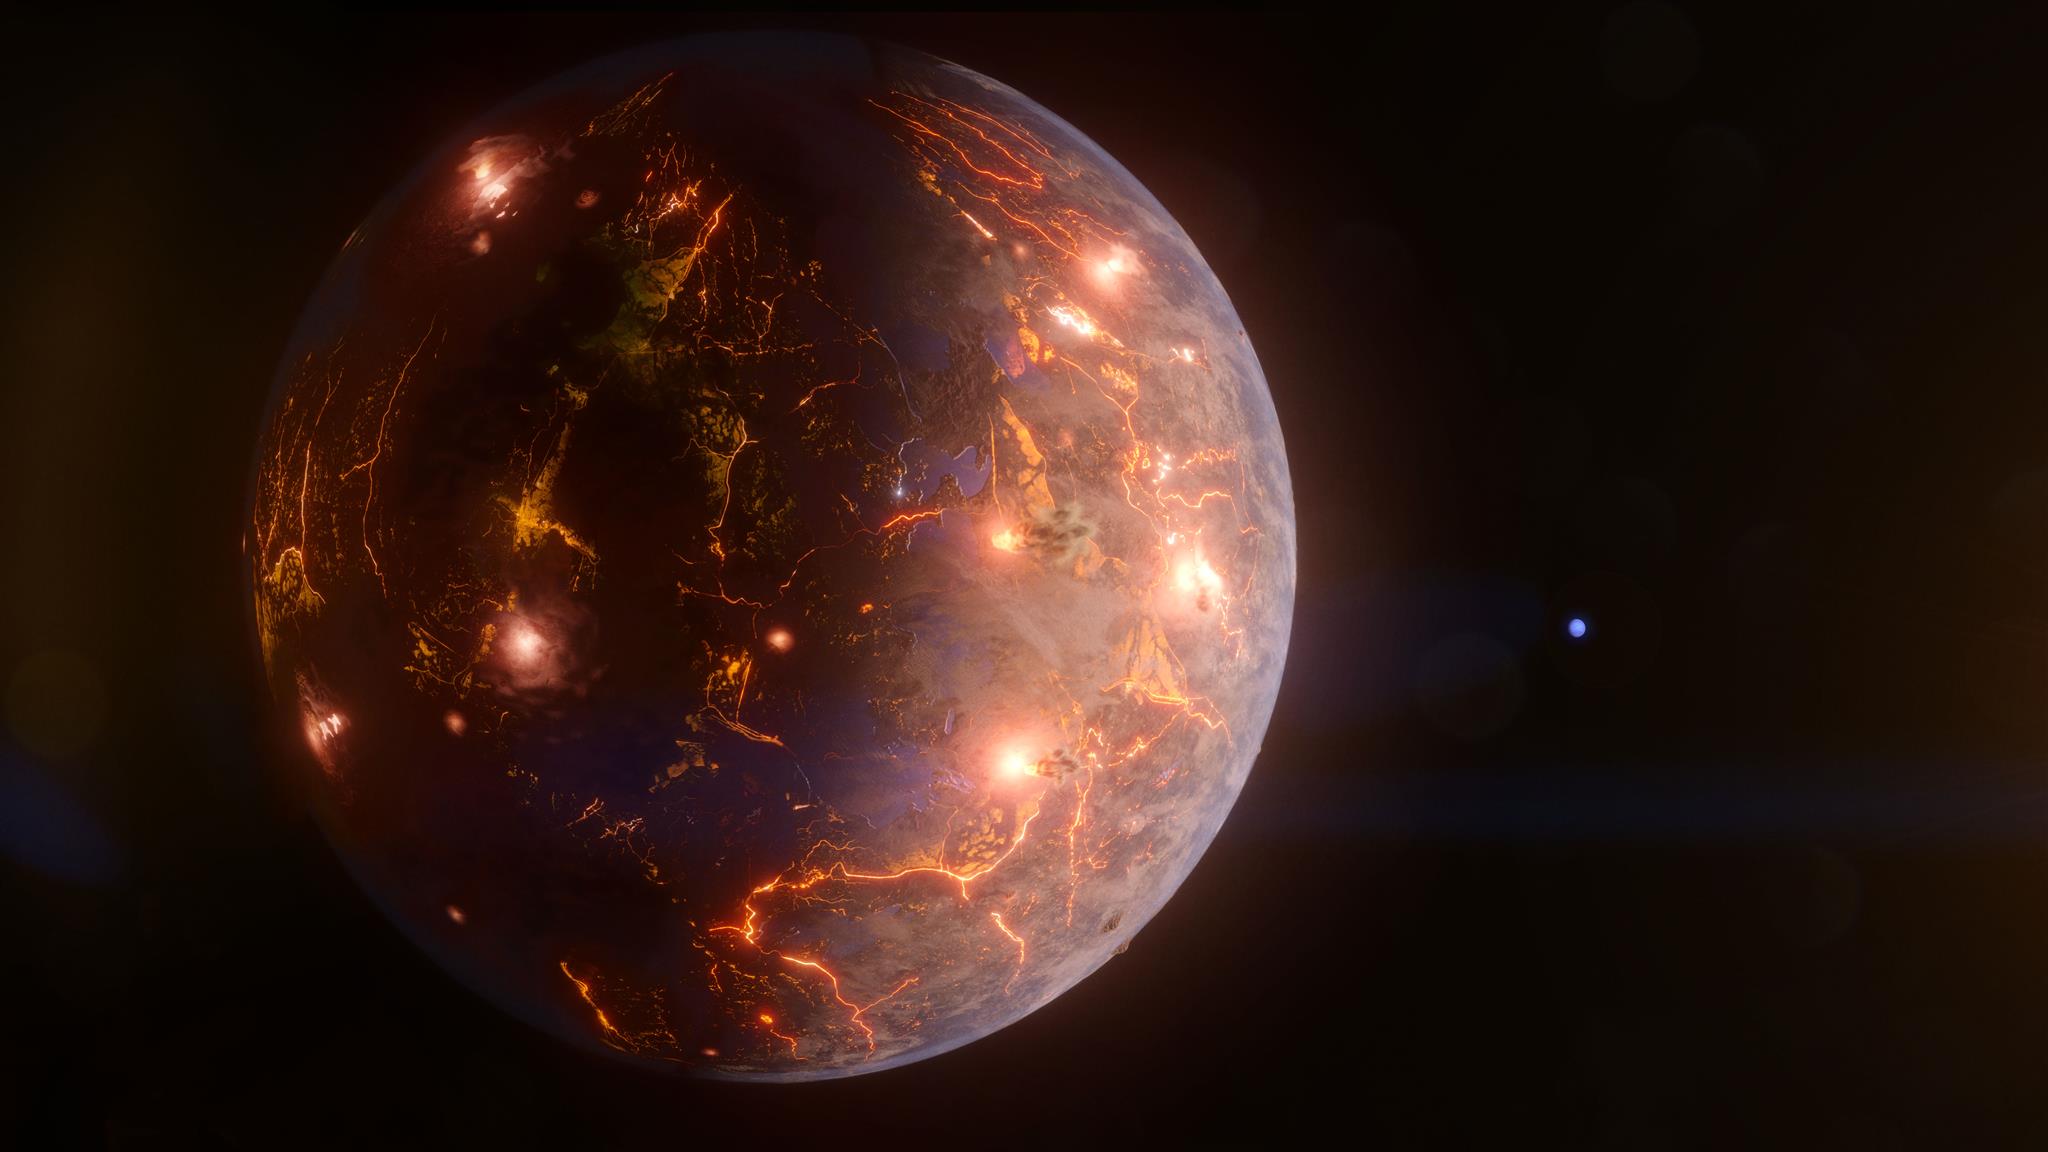 LP 791-18 d, illustrated here in an artist's concept, is an Earth-size world about 90 light-years away. The gravitational tug from a more massive planet in the system, shown as a blue disk in the background, may result in internal heating and volcanic eruptions – as much as Jupiter’s moon Io, the most geologically active body in the solar system. Astronomers discovered and studied the planet using data from NASA’s Spitzer Space Telescope and TESS (Transiting Exoplanet Survey Satellite) along with many other observatories.Credit: NASA’s Goddard Space Flight Center/Chris Smith (KRBwyle)